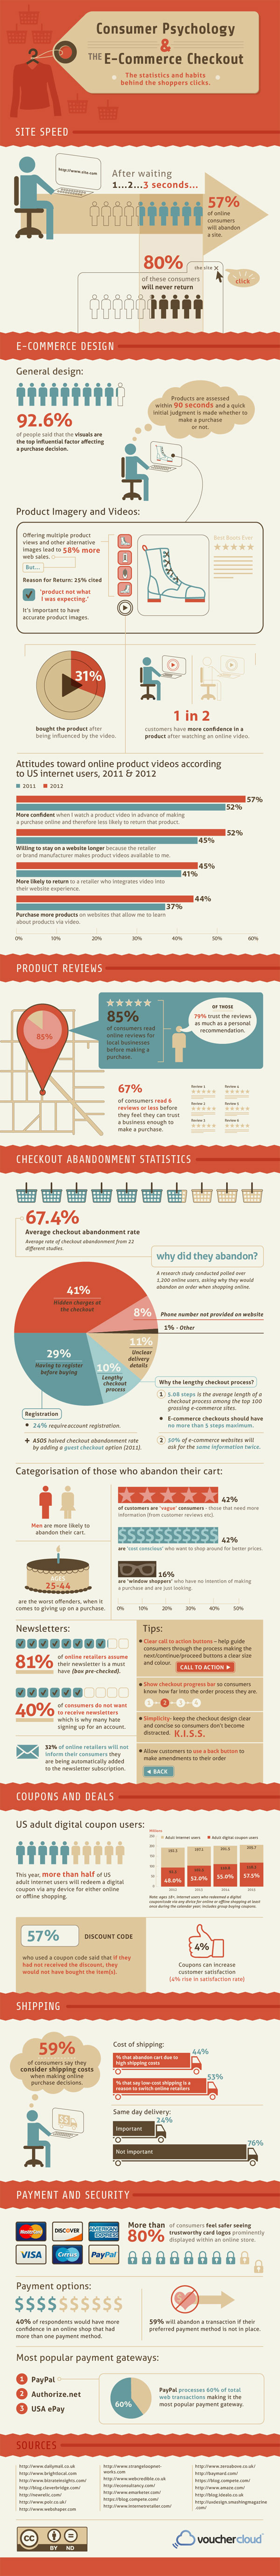 psychology-of-online-checkout-infographic